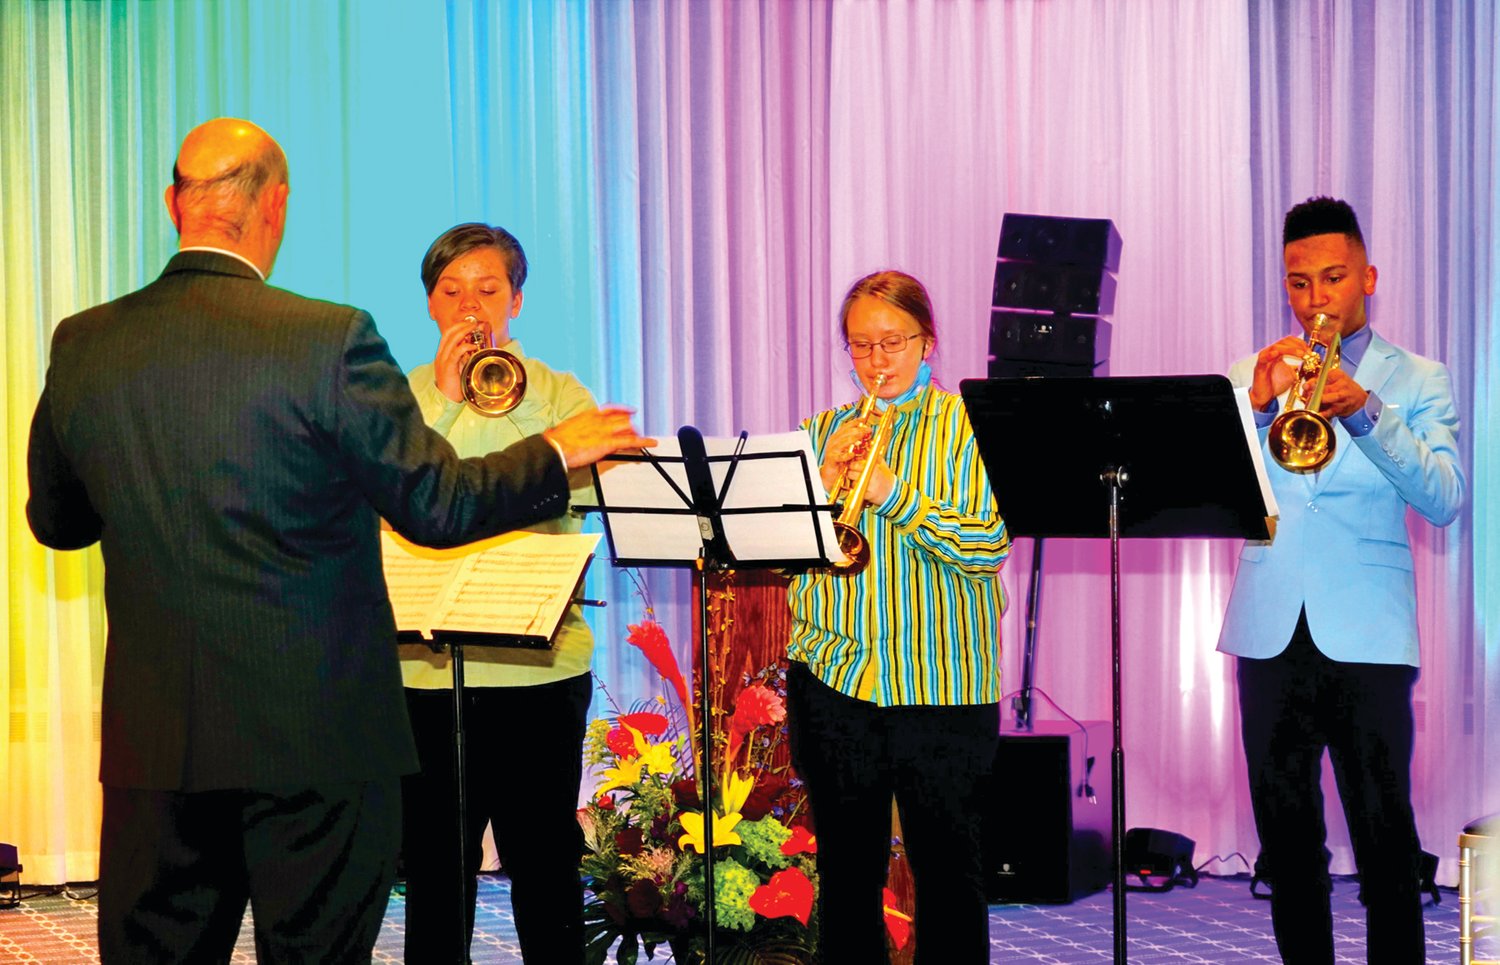 A trumpet ensemble composed of members of the Youth Orchestra of Bucks County's Students-in-Concert program performs at the YOBC annual benefit. Students-in-Concert is YOBC’s tuition-free music program for students in the Morrisville and Bristol Township school districts.